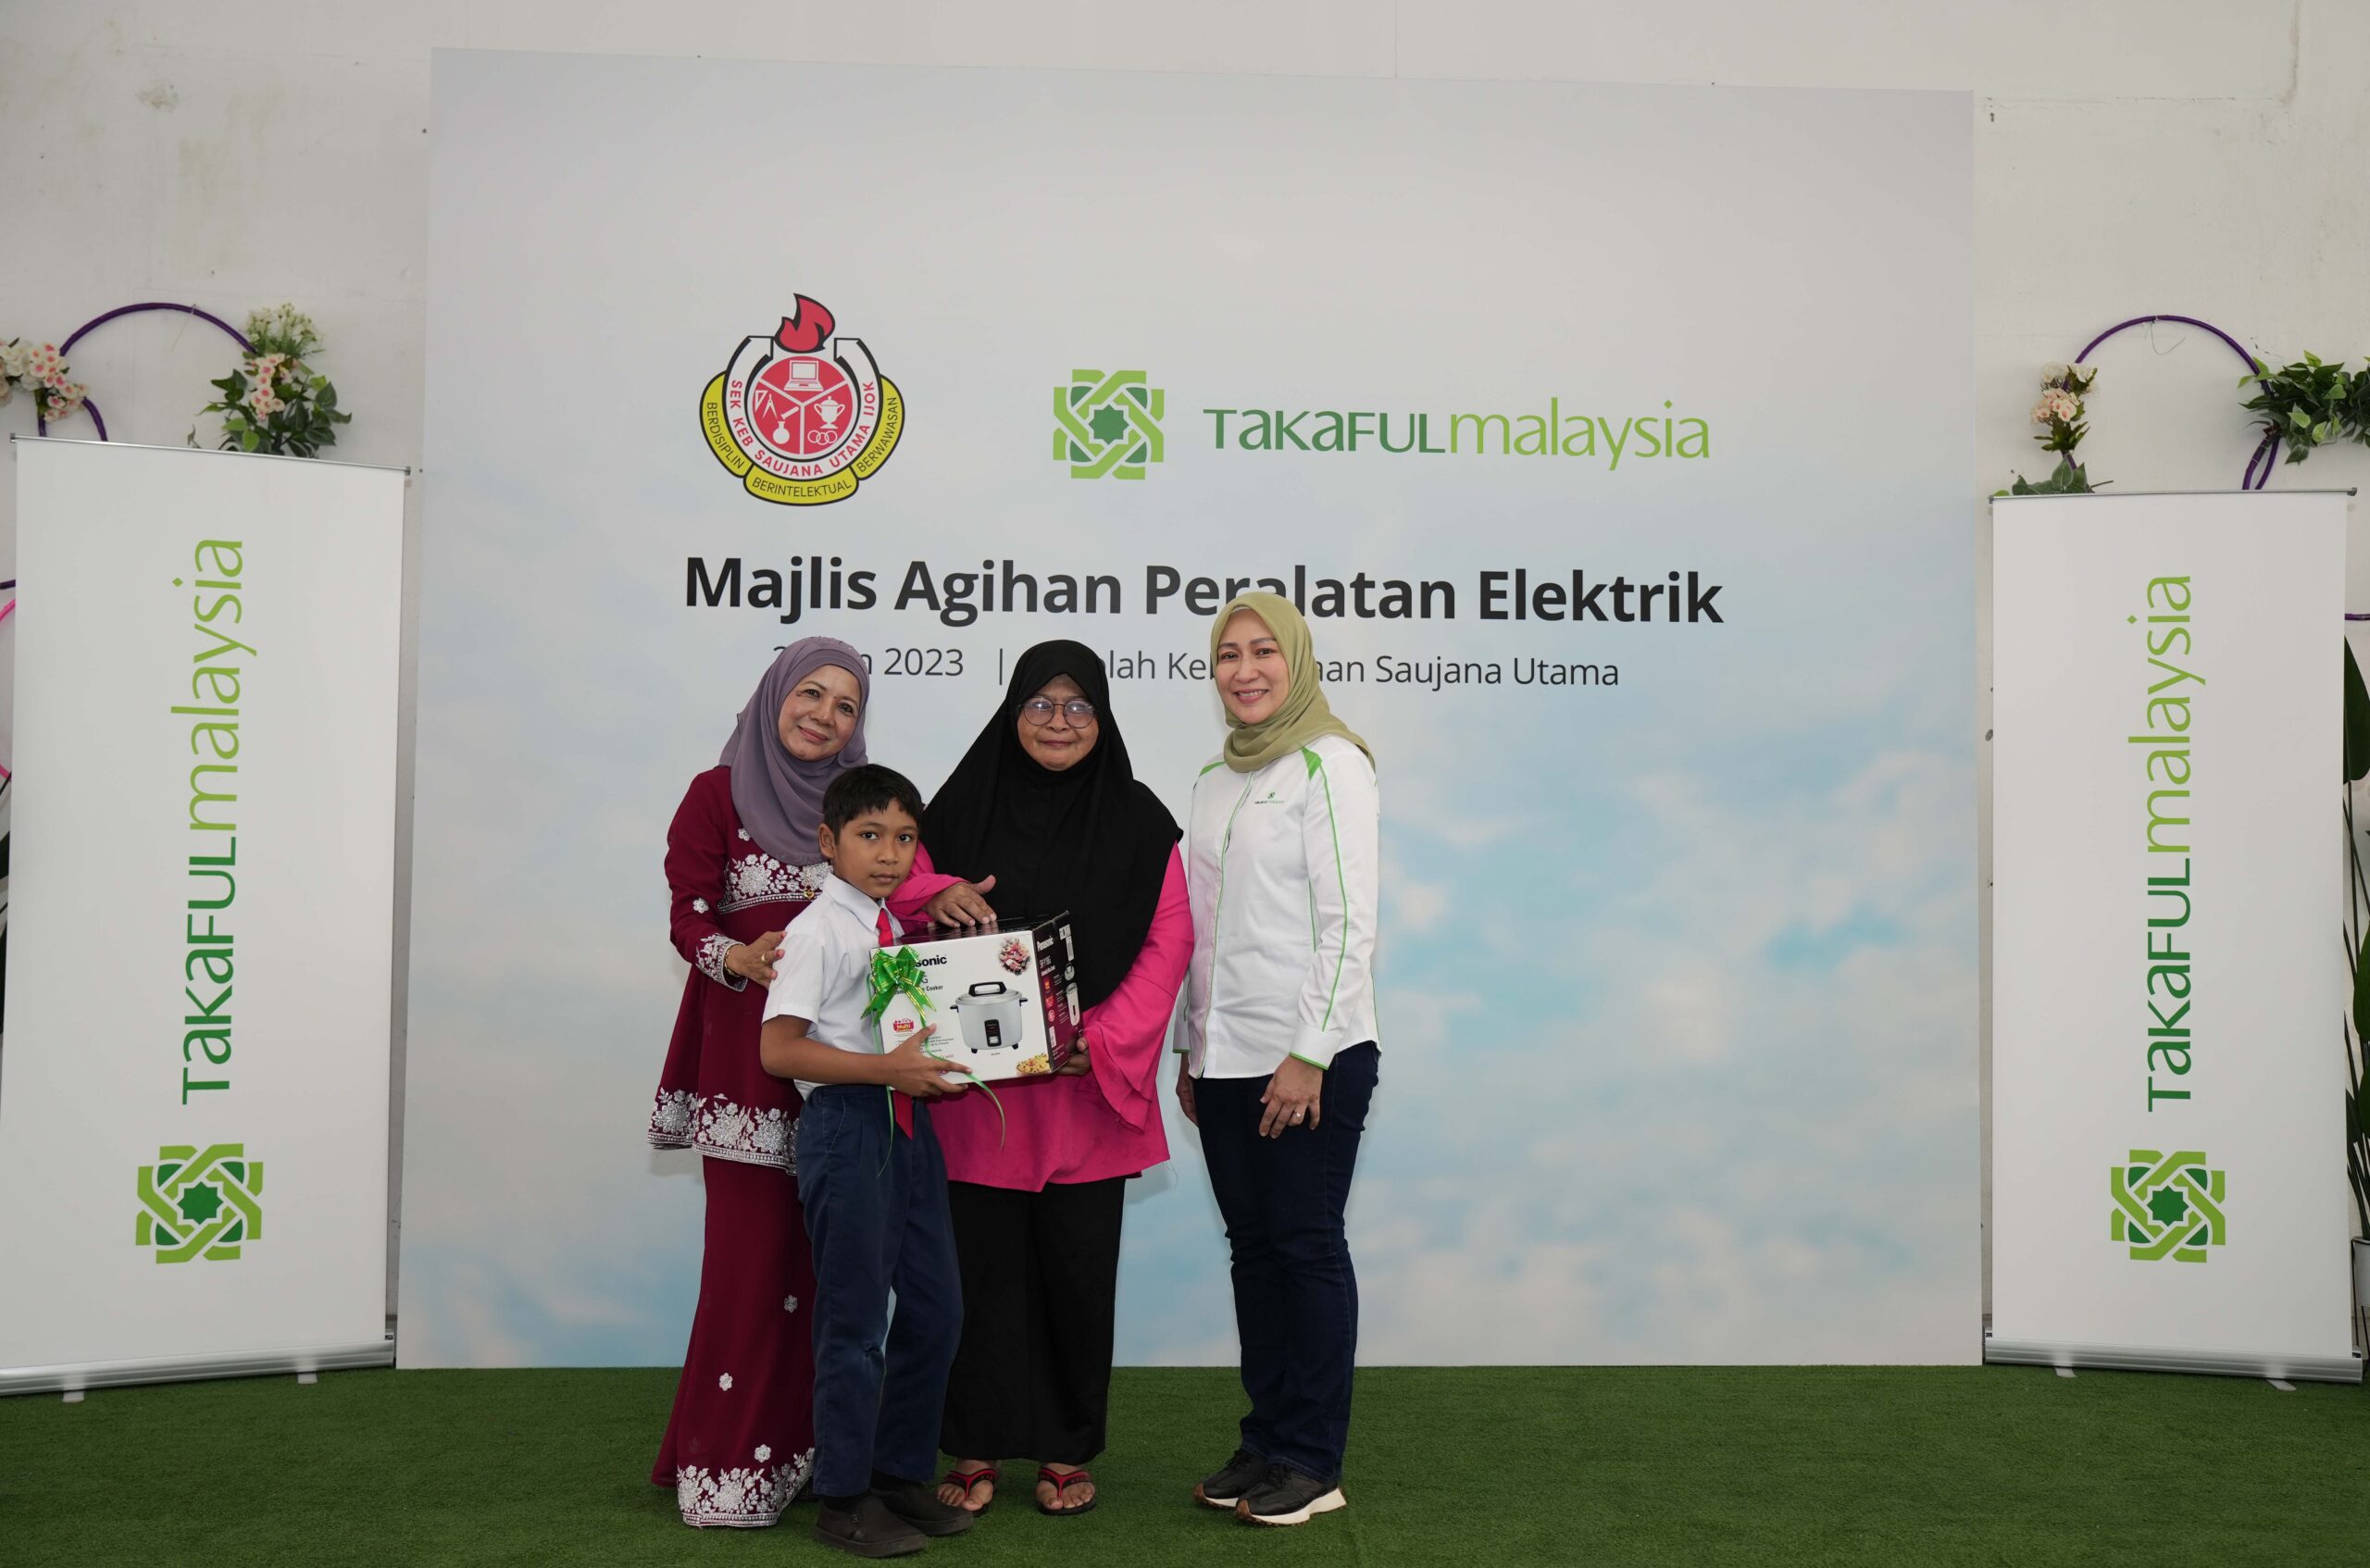 Takaful malaysia donates household appliances to 64 asnaf students and families | weirdkaya